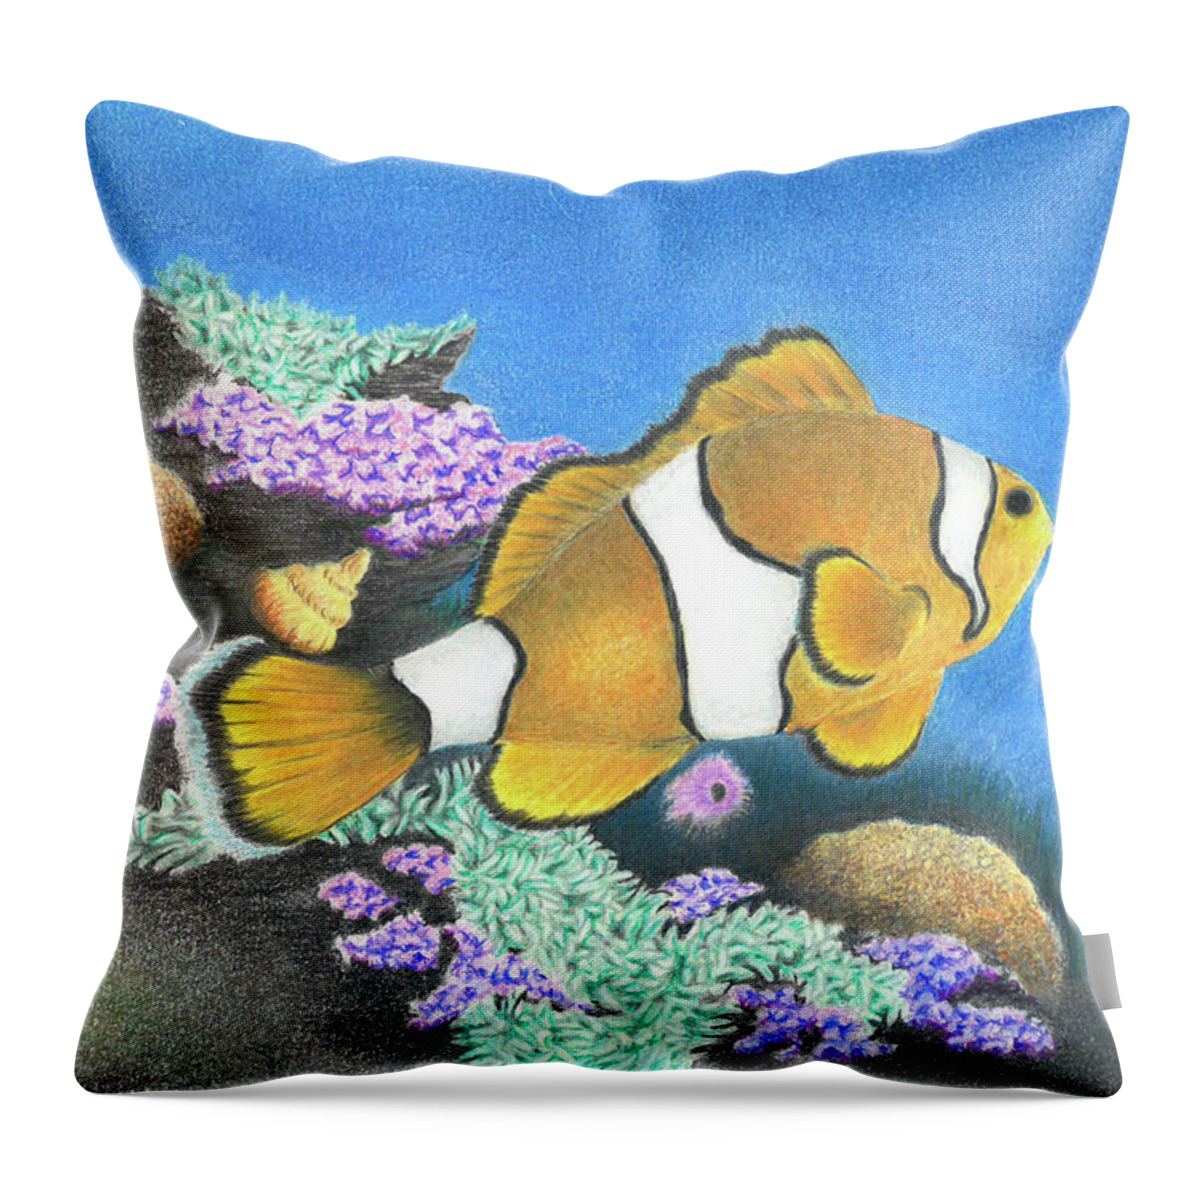 Fish Throw Pillow featuring the drawing Clownfish by Troy Levesque